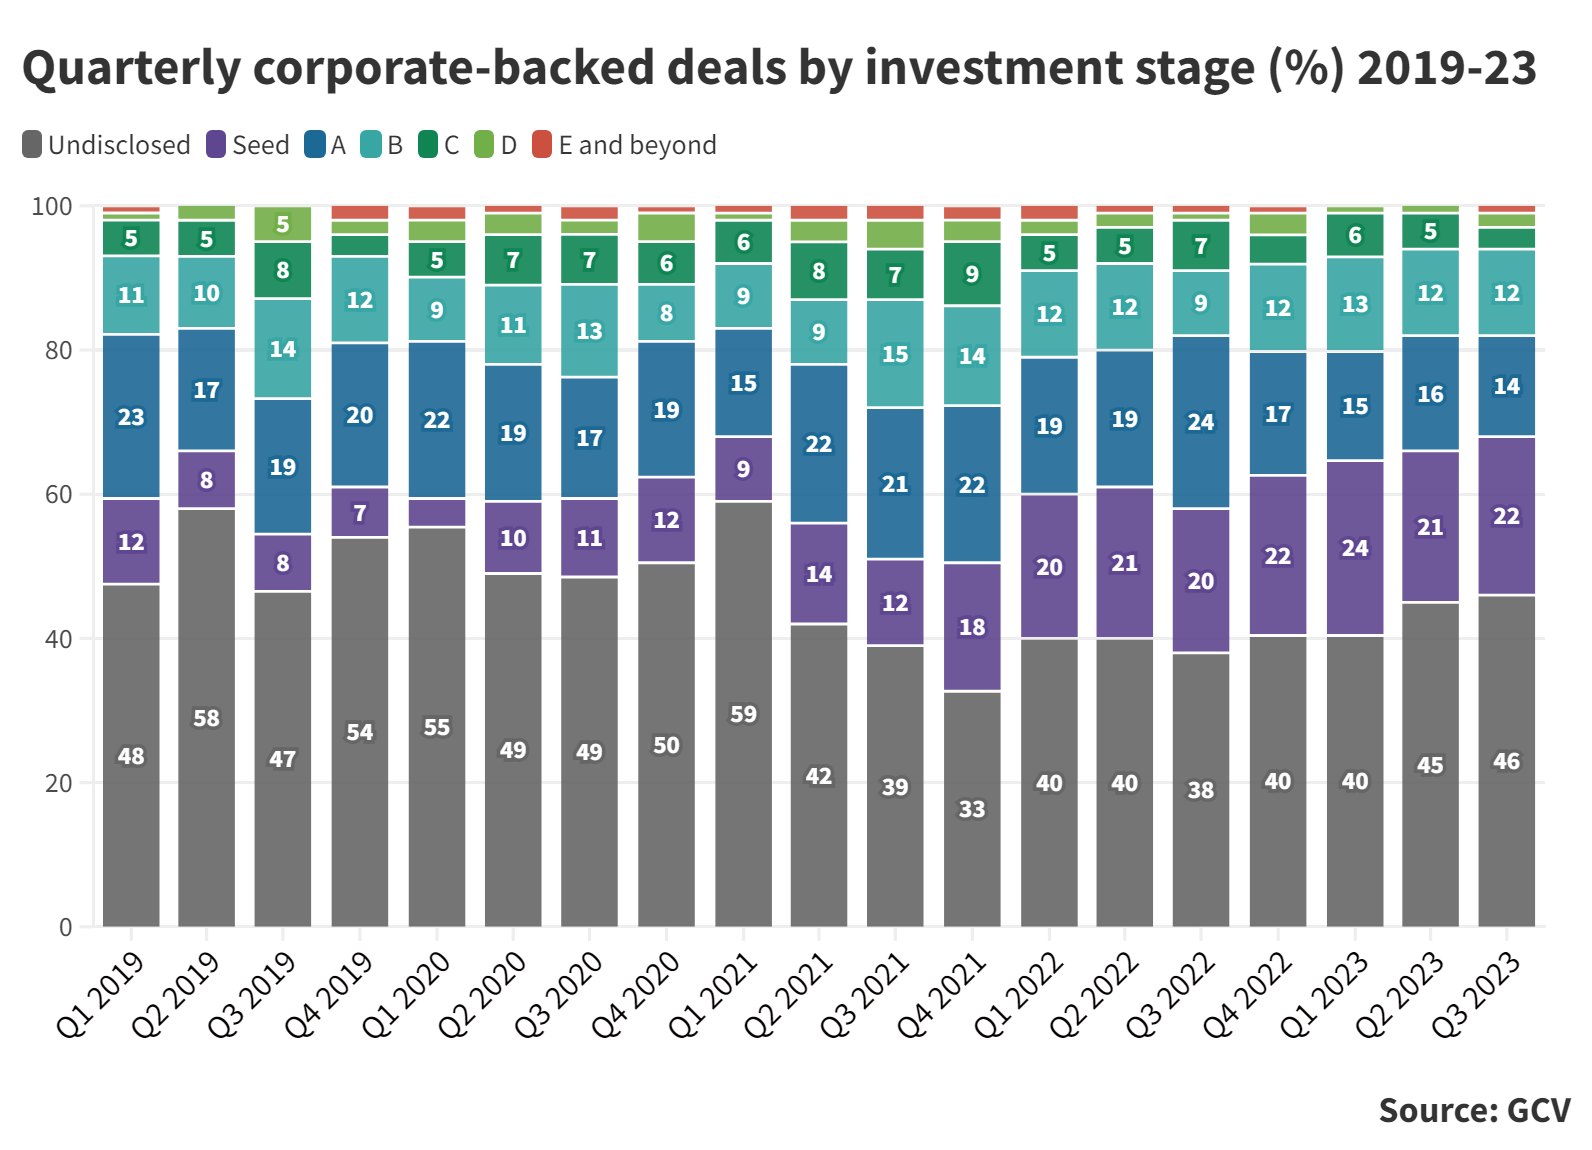 Stacked bar chart showing quarterly corporate-backed deals by investment stage % 2019-23